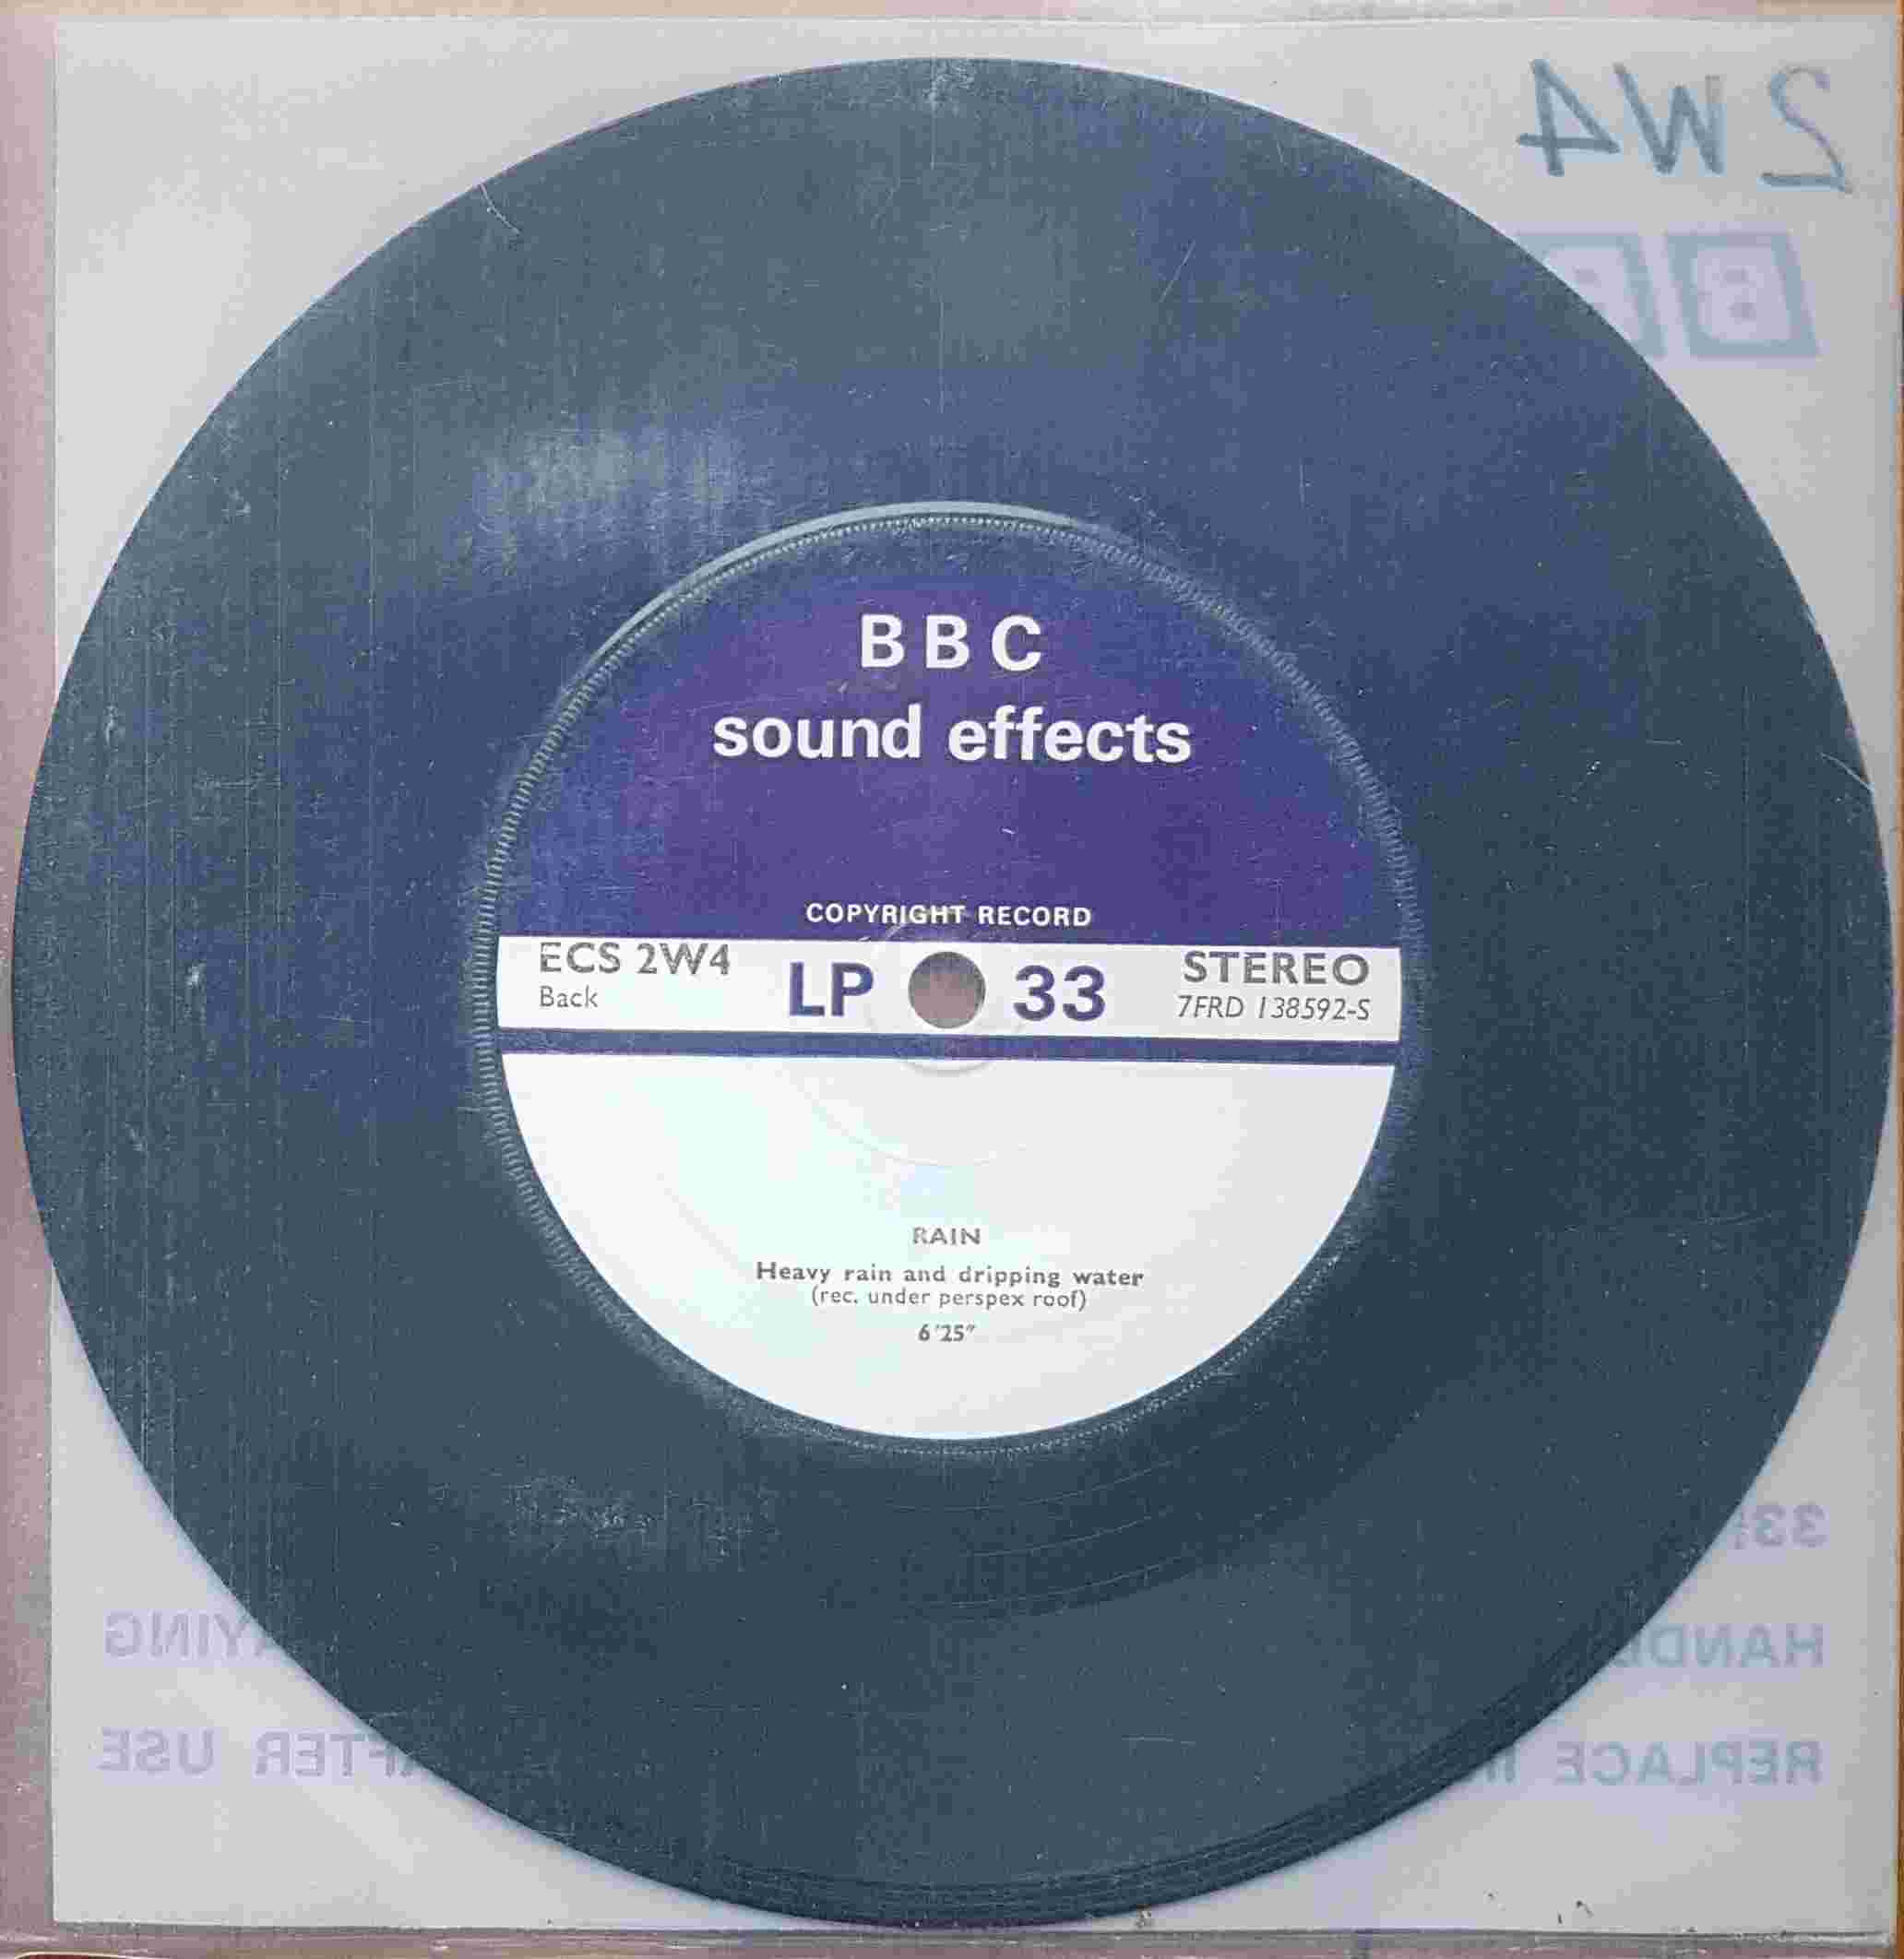 Picture of ECS 2W4 Wind and rain / Rain by artist Not registered from the BBC records and Tapes library